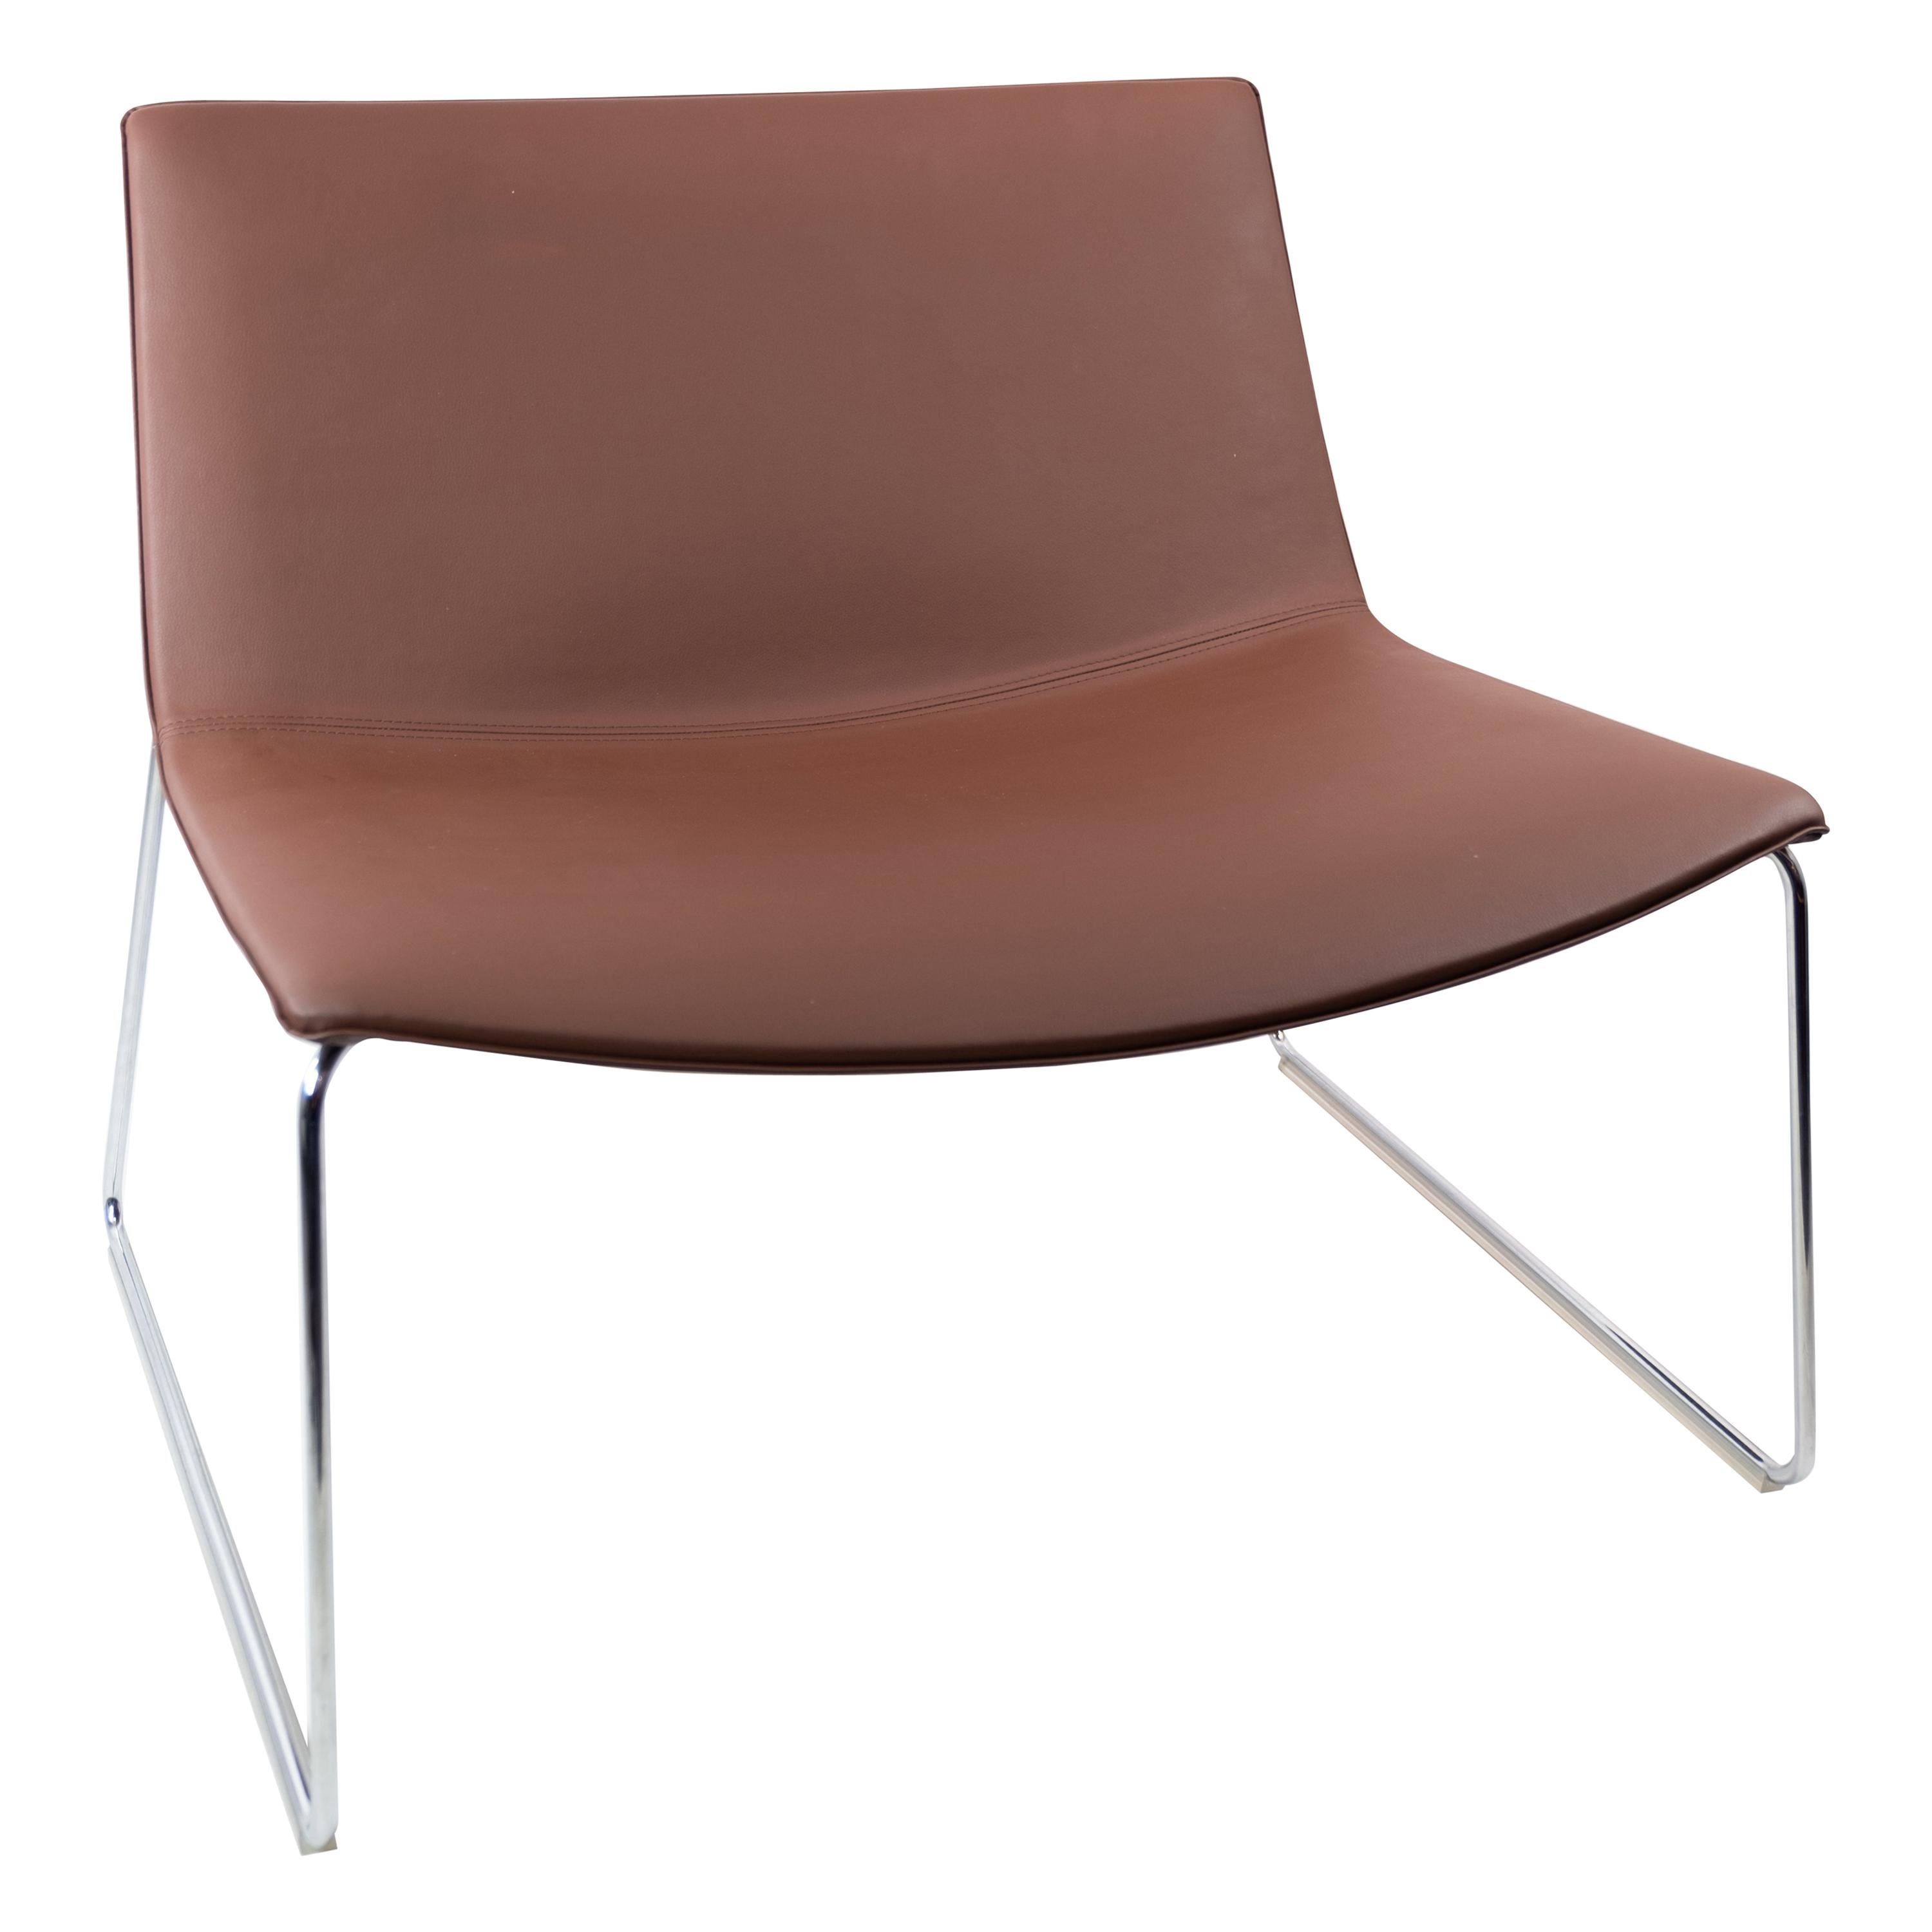 Italian Easy Chair, Model 80, Designed by Lievore Altherr Molina and Arper